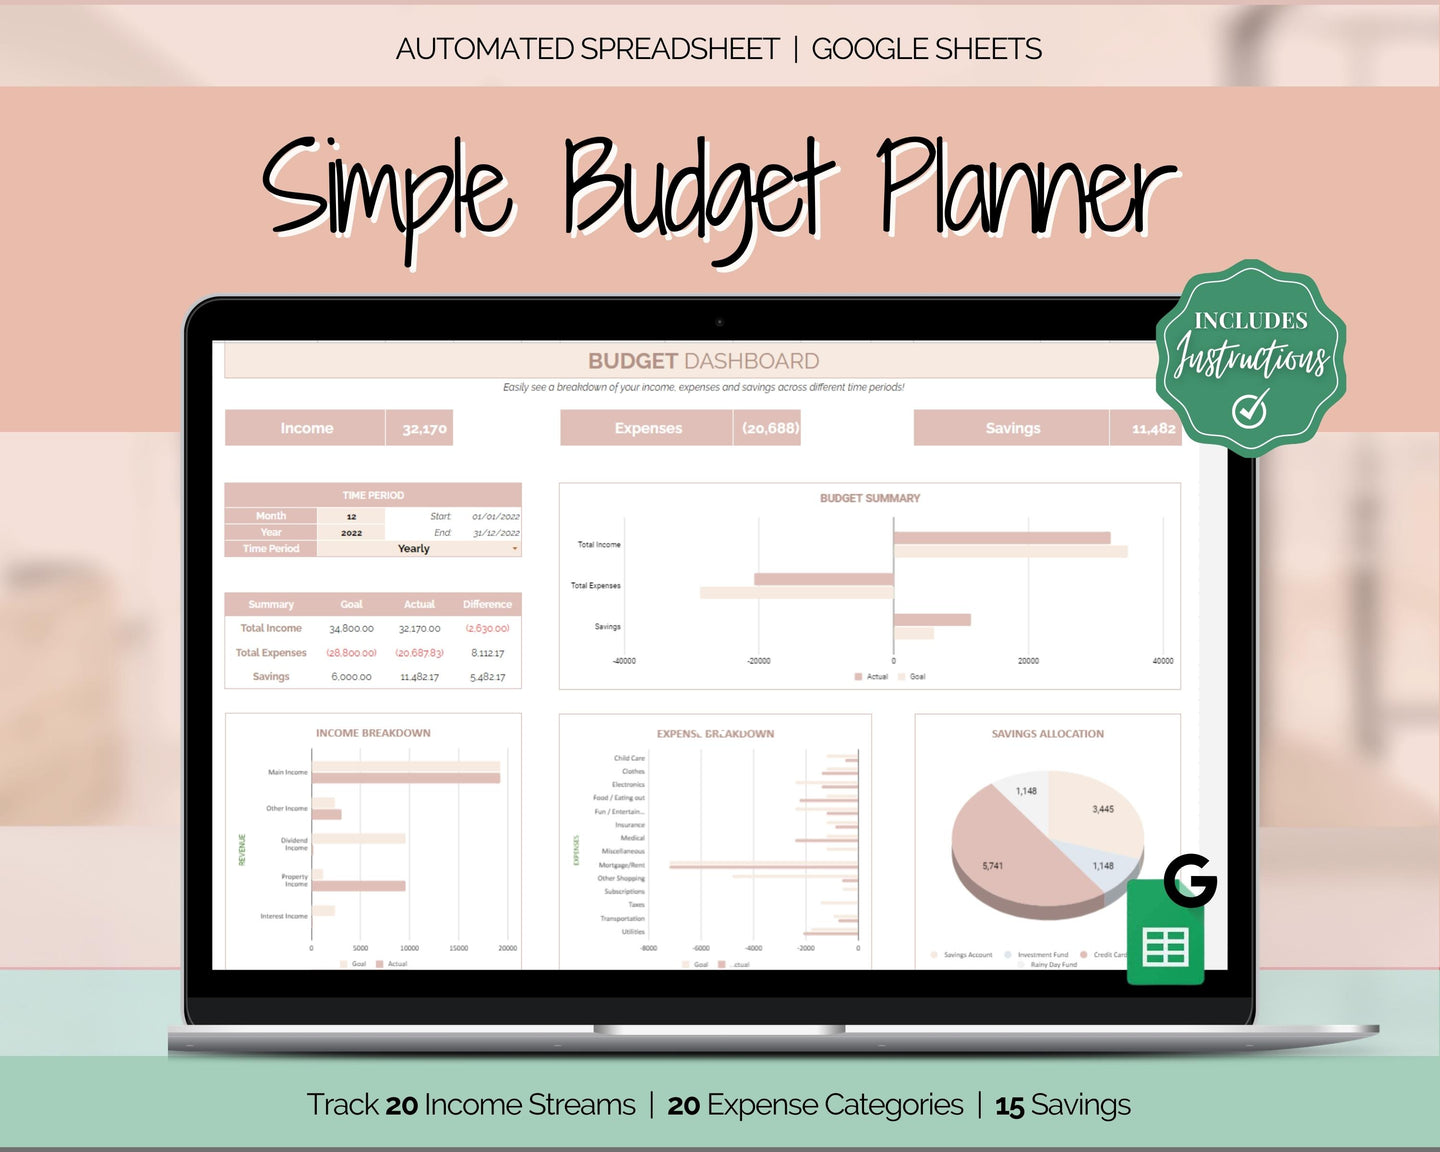 Simple Budget Planner Spreadsheet | Google Sheets Automated Monthly Finance & Expenses Spreadsheet | Orange